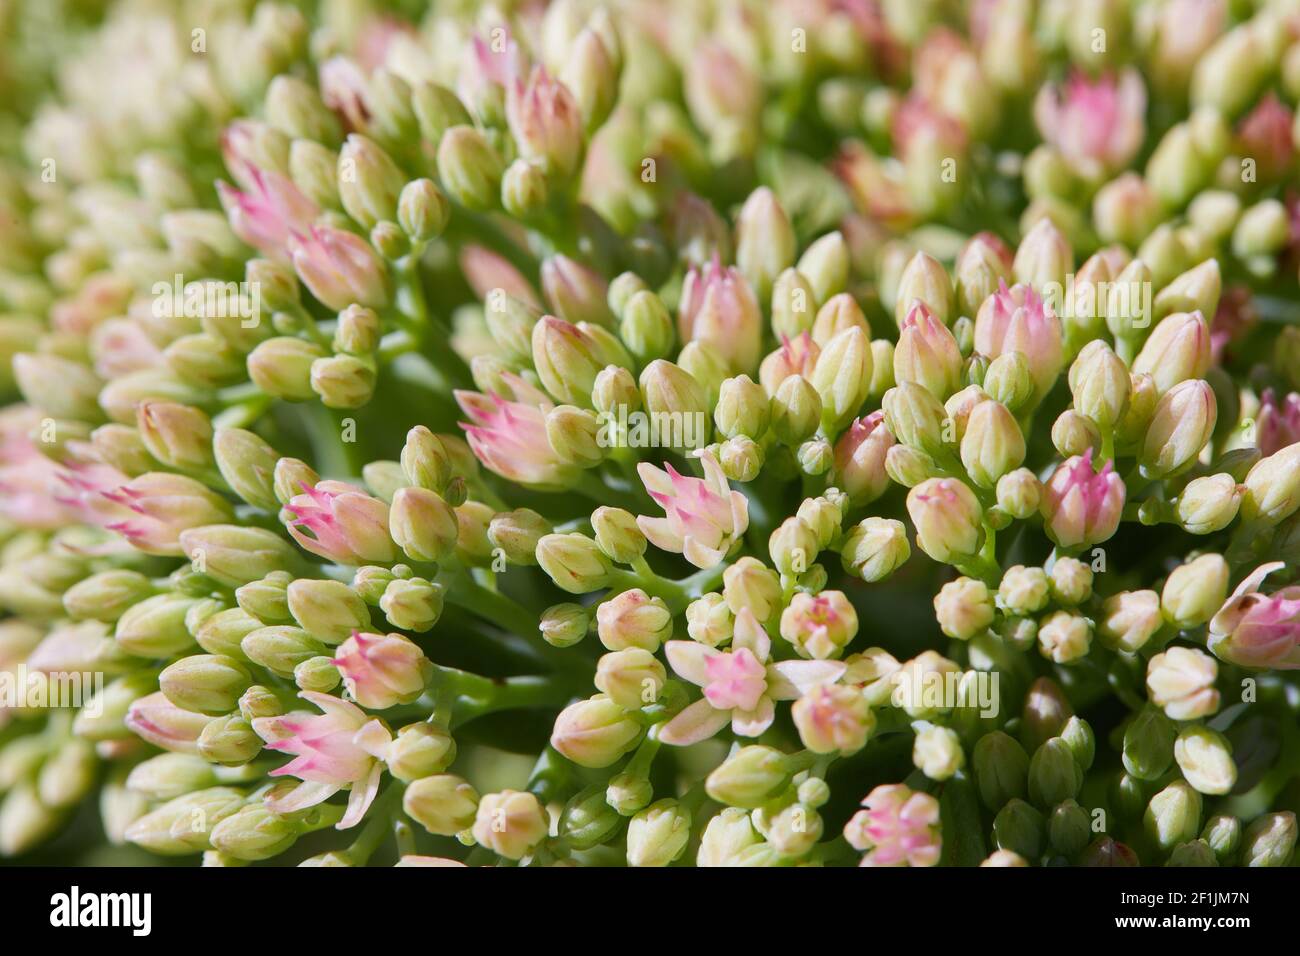 Showy stonecrop, or ice plant (Hylotelephium spectabile) is ready to bloom, close up buds.  This plant belongs to the stonecrop family, Crassulaceae. Stock Photo